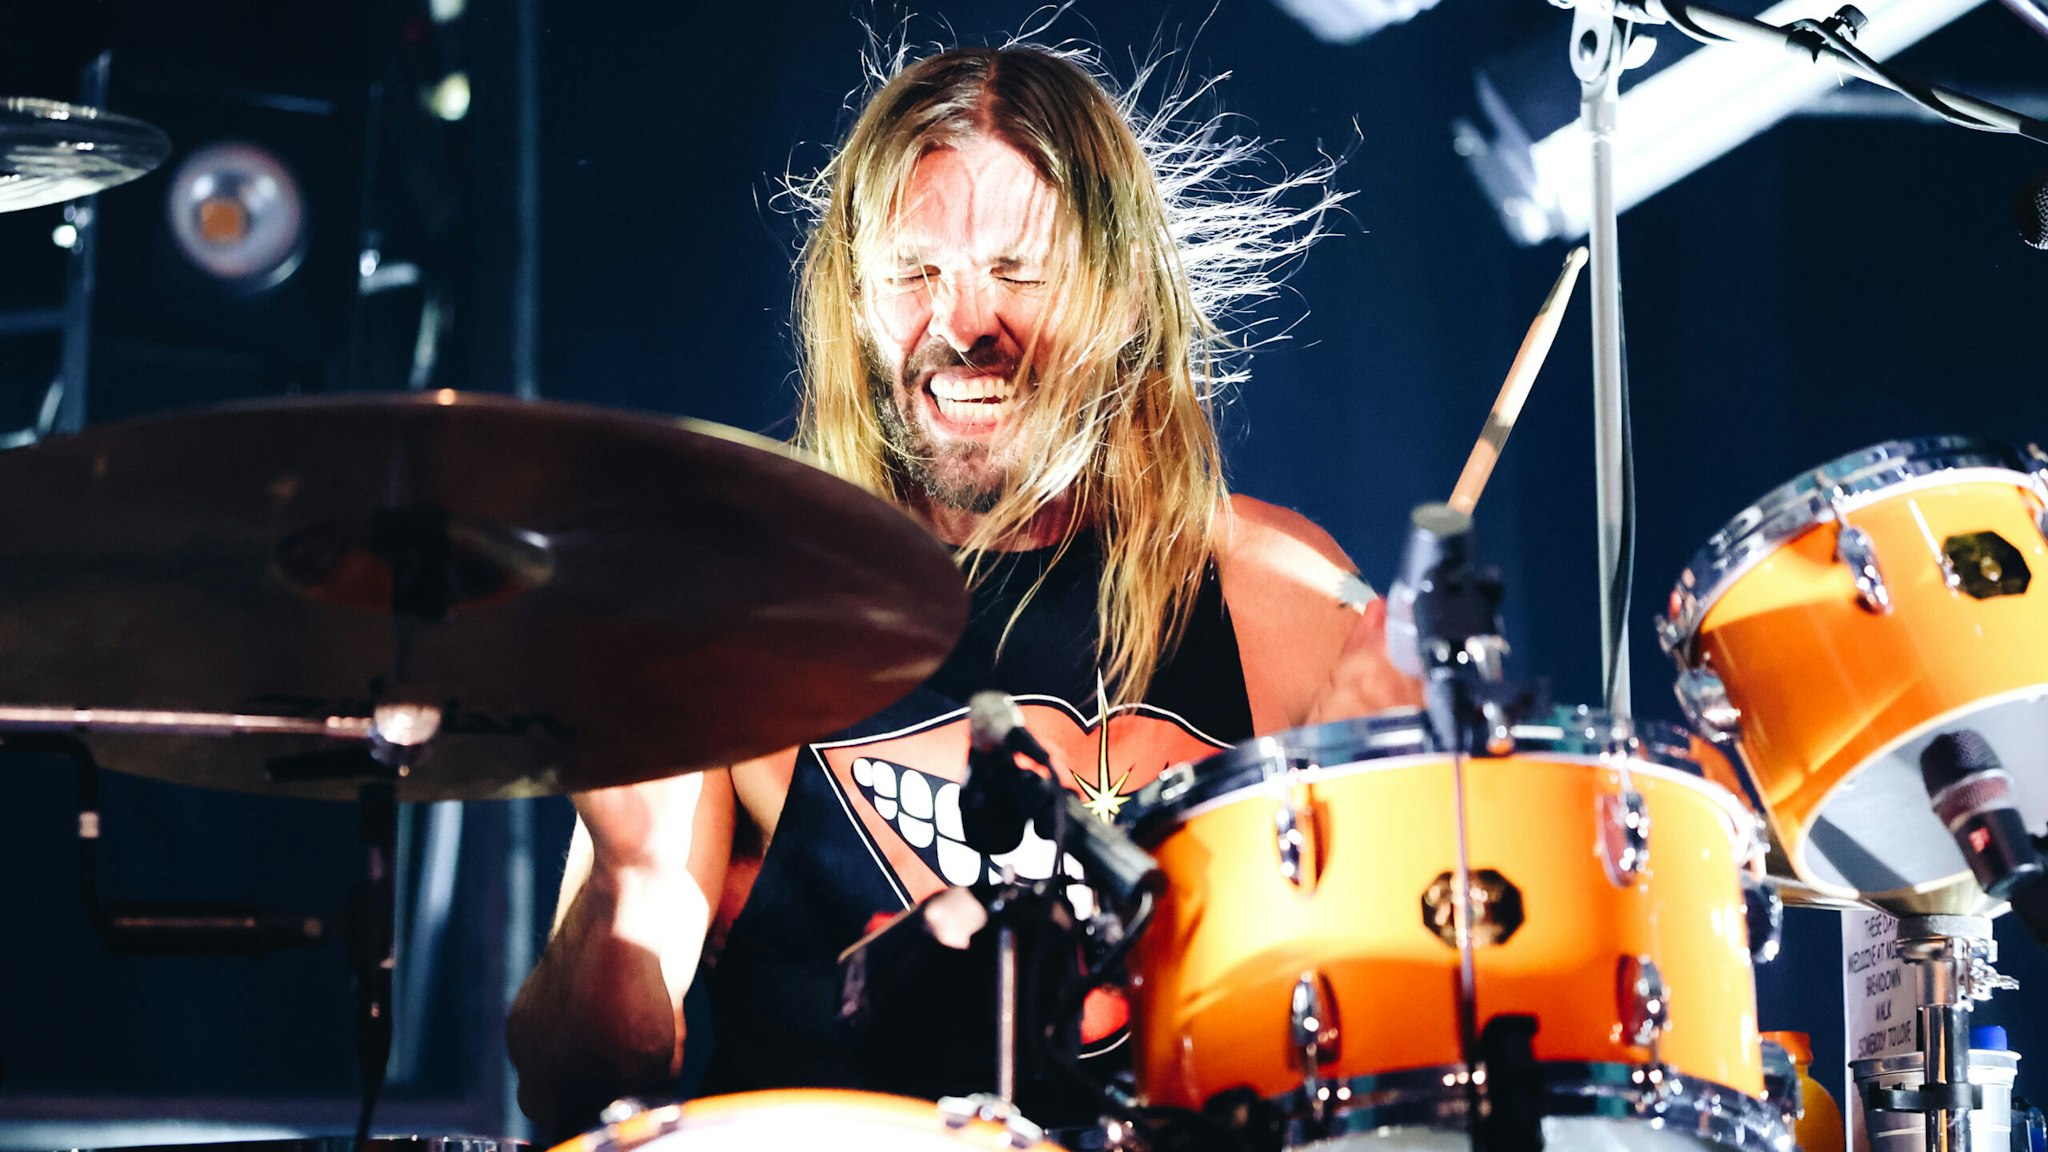 HOLLYWOOD, CALIFORNIA - FEBRUARY 16: Taylor Hawkins of Foo Fighters performs onstage at the after party for the Los Angeles premiere of "Studio 666" at the Fonda Theatre on February 16, 2022 in Hollywood, California.